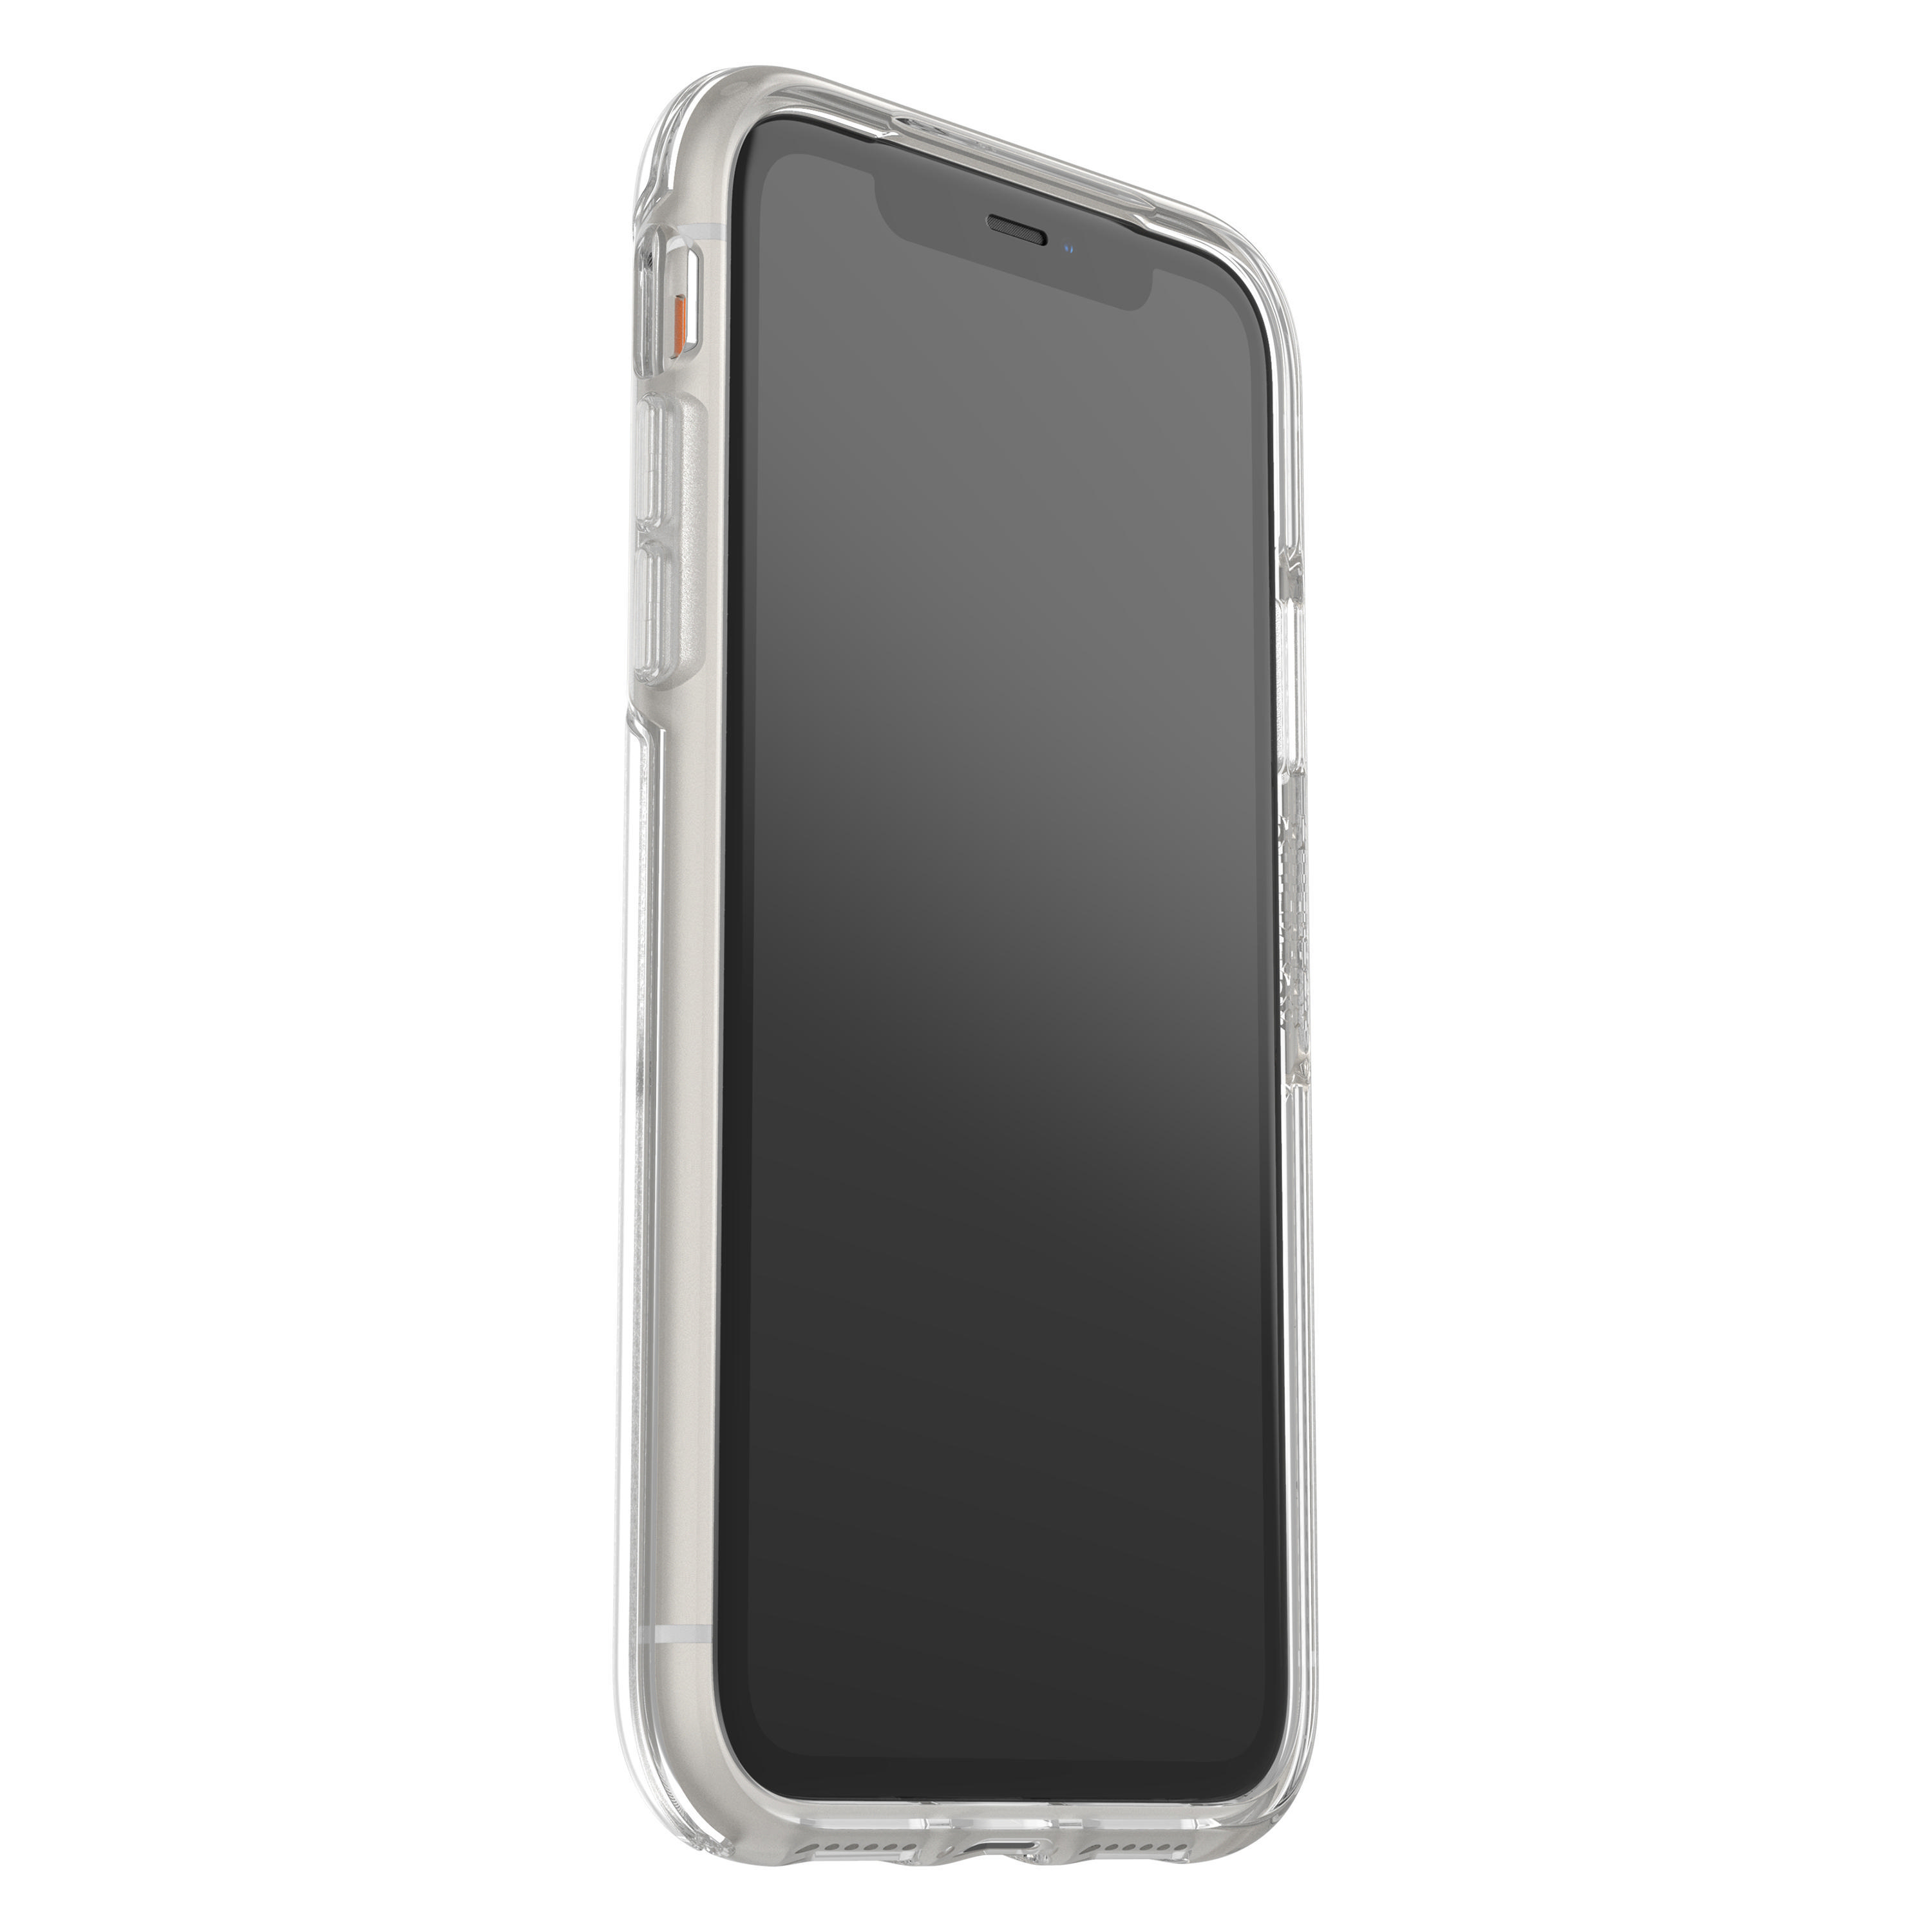 OTTERBOX Symmetry, Transparent Backcover, iPhone 11, Apple